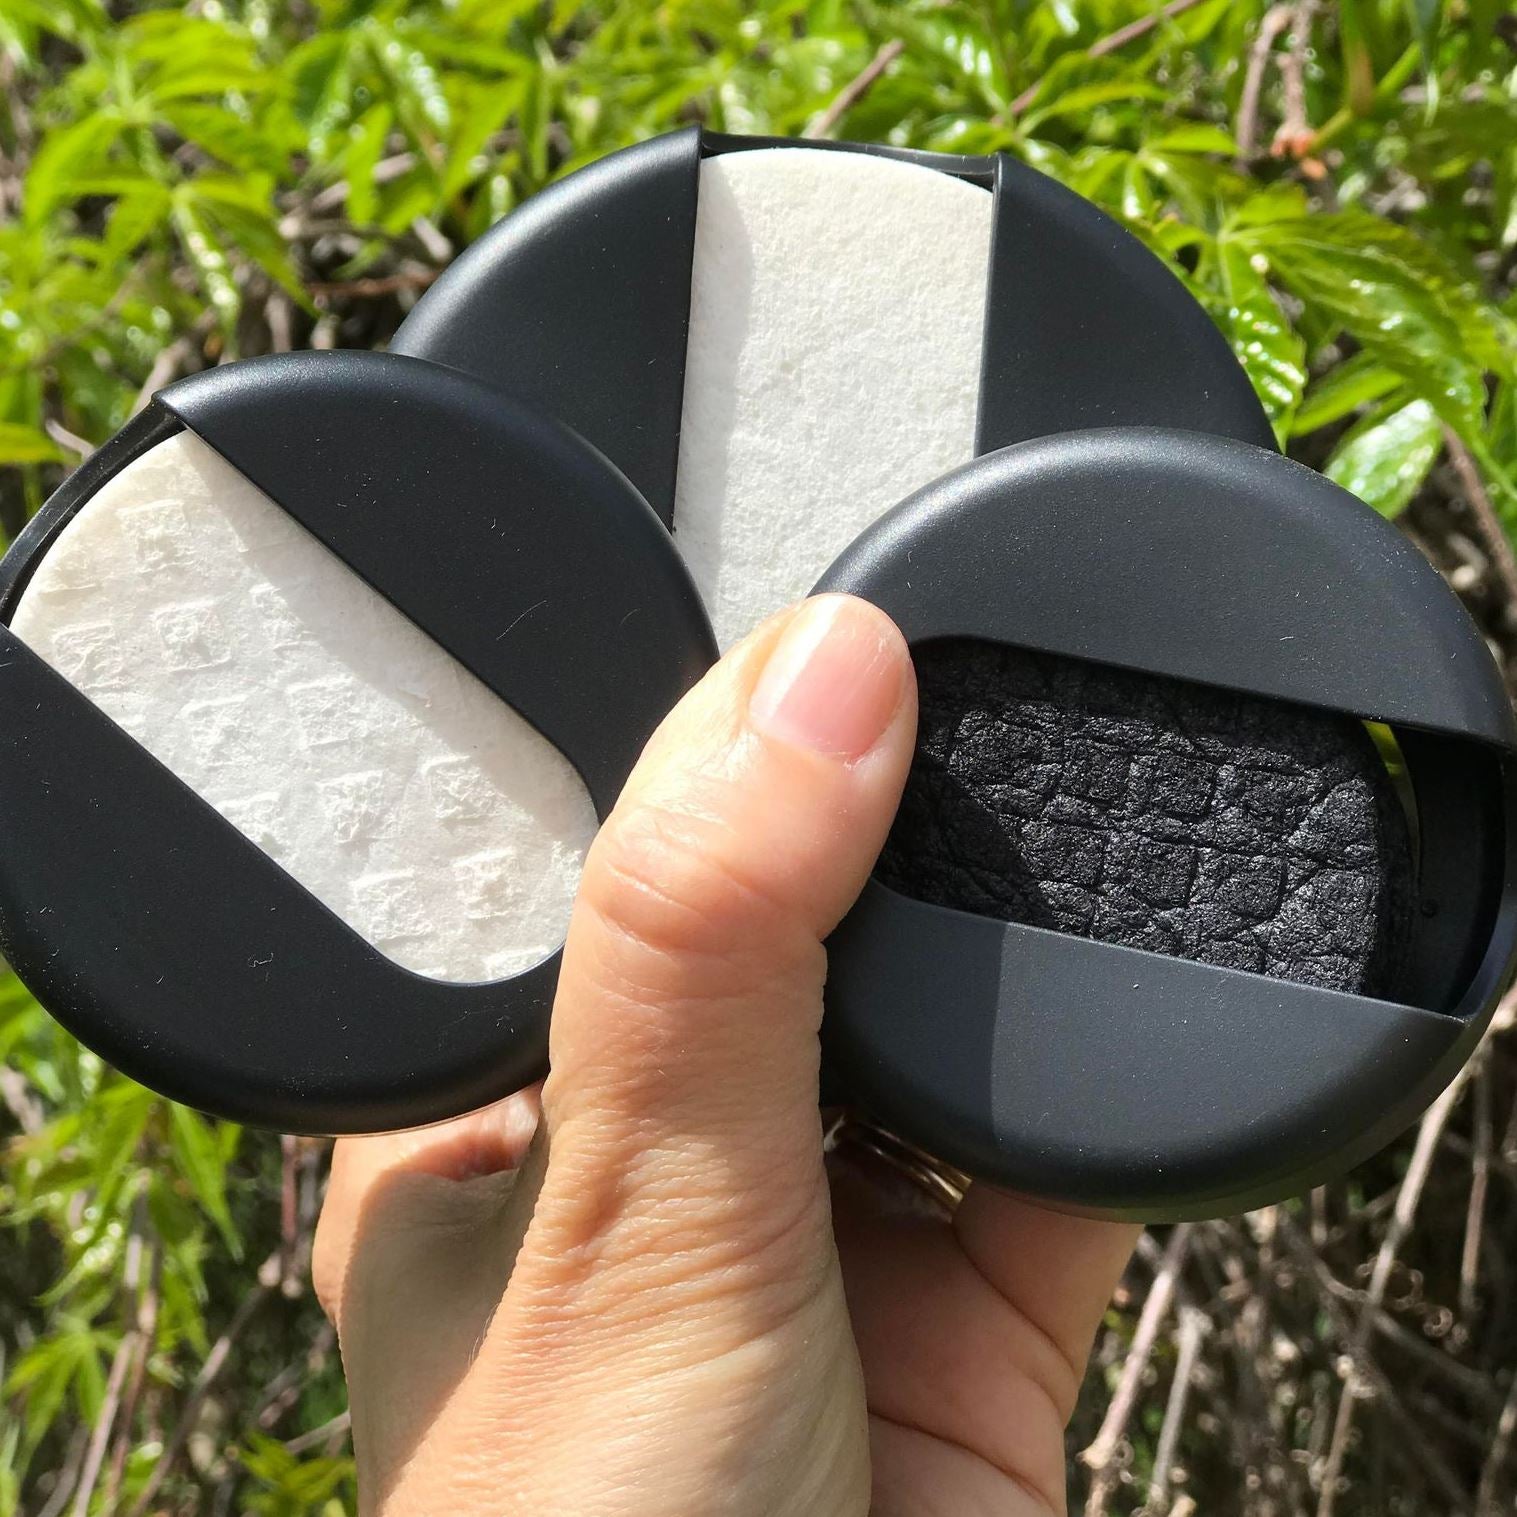 A hand holding Last Object reusable and compostable LastRound makeup remover pads in black and white regular size and large white rounds in a black case made with recycled ocean plastics